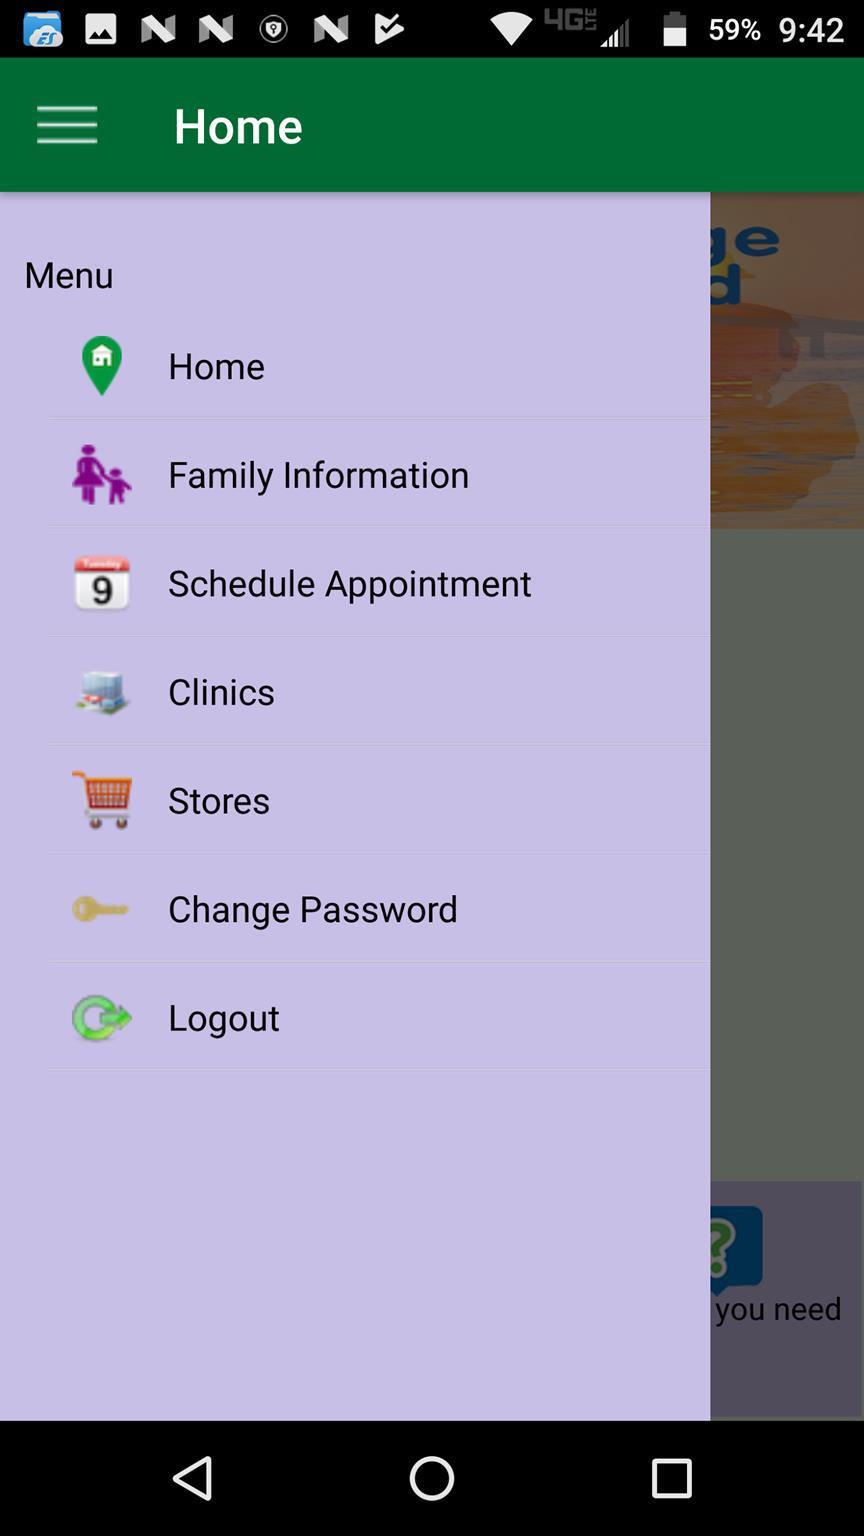 Appointment What will you need Home Menu displays the following options: